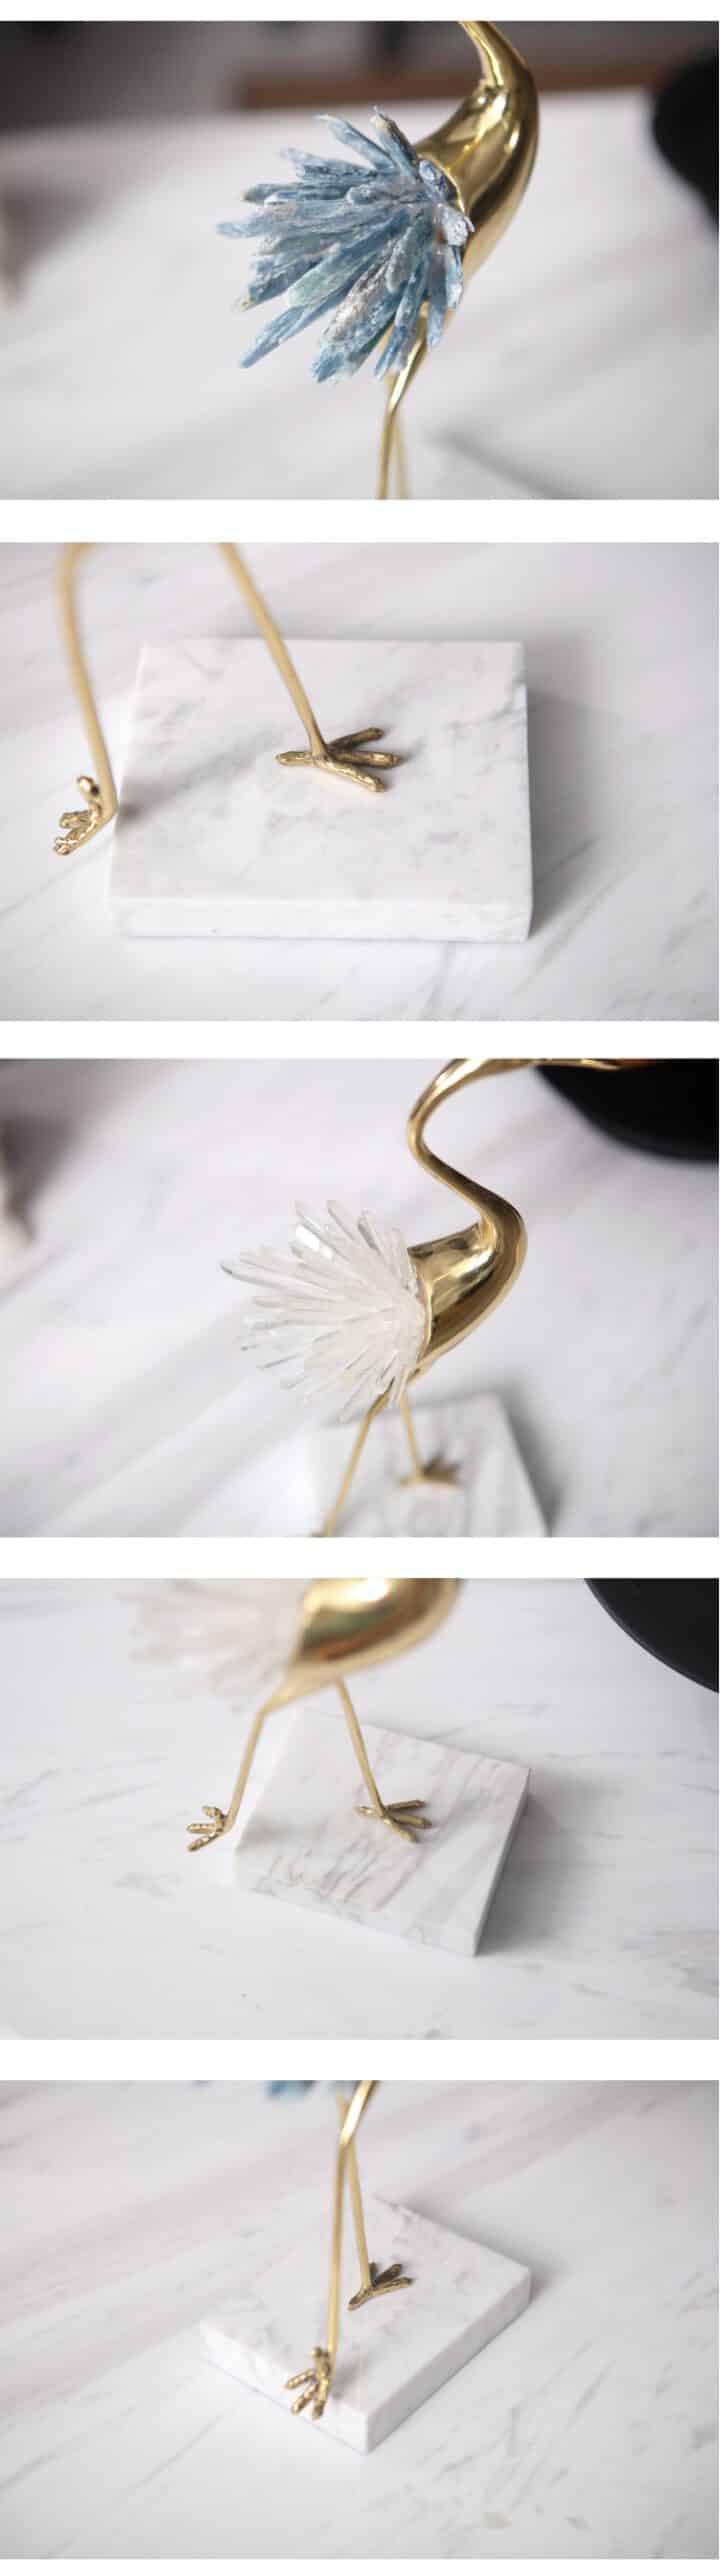 Luxurious Copper Flamingo Statue Sculpture With White Blue Crystal Tail Home Art Gift Figurines Home Decor Marble Accessories